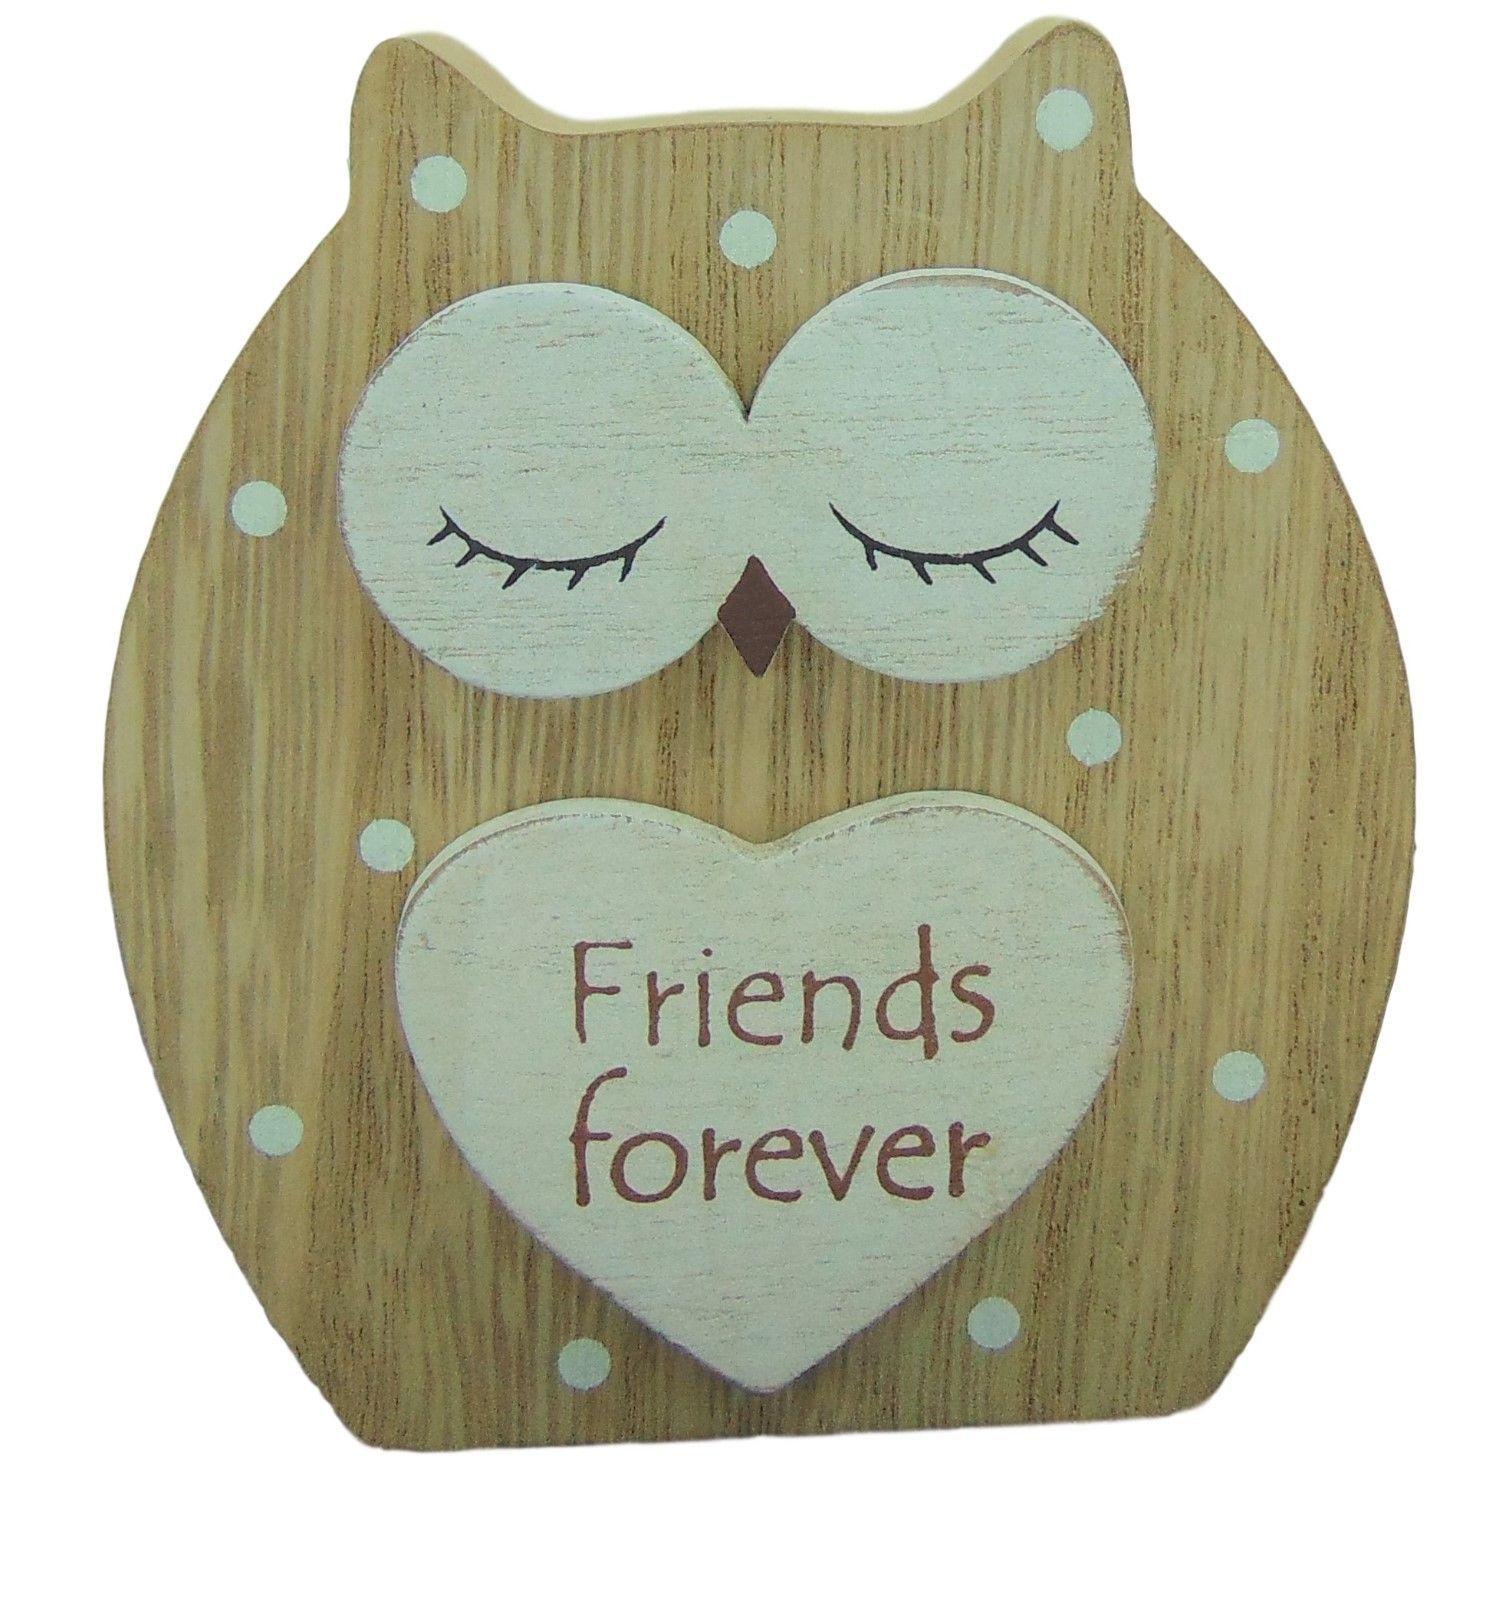 Standing Owl Logo - FRIENDS FOREVER DREAMY WOODEN STANDING OWL GREAT GIFT DAY FRIENDS